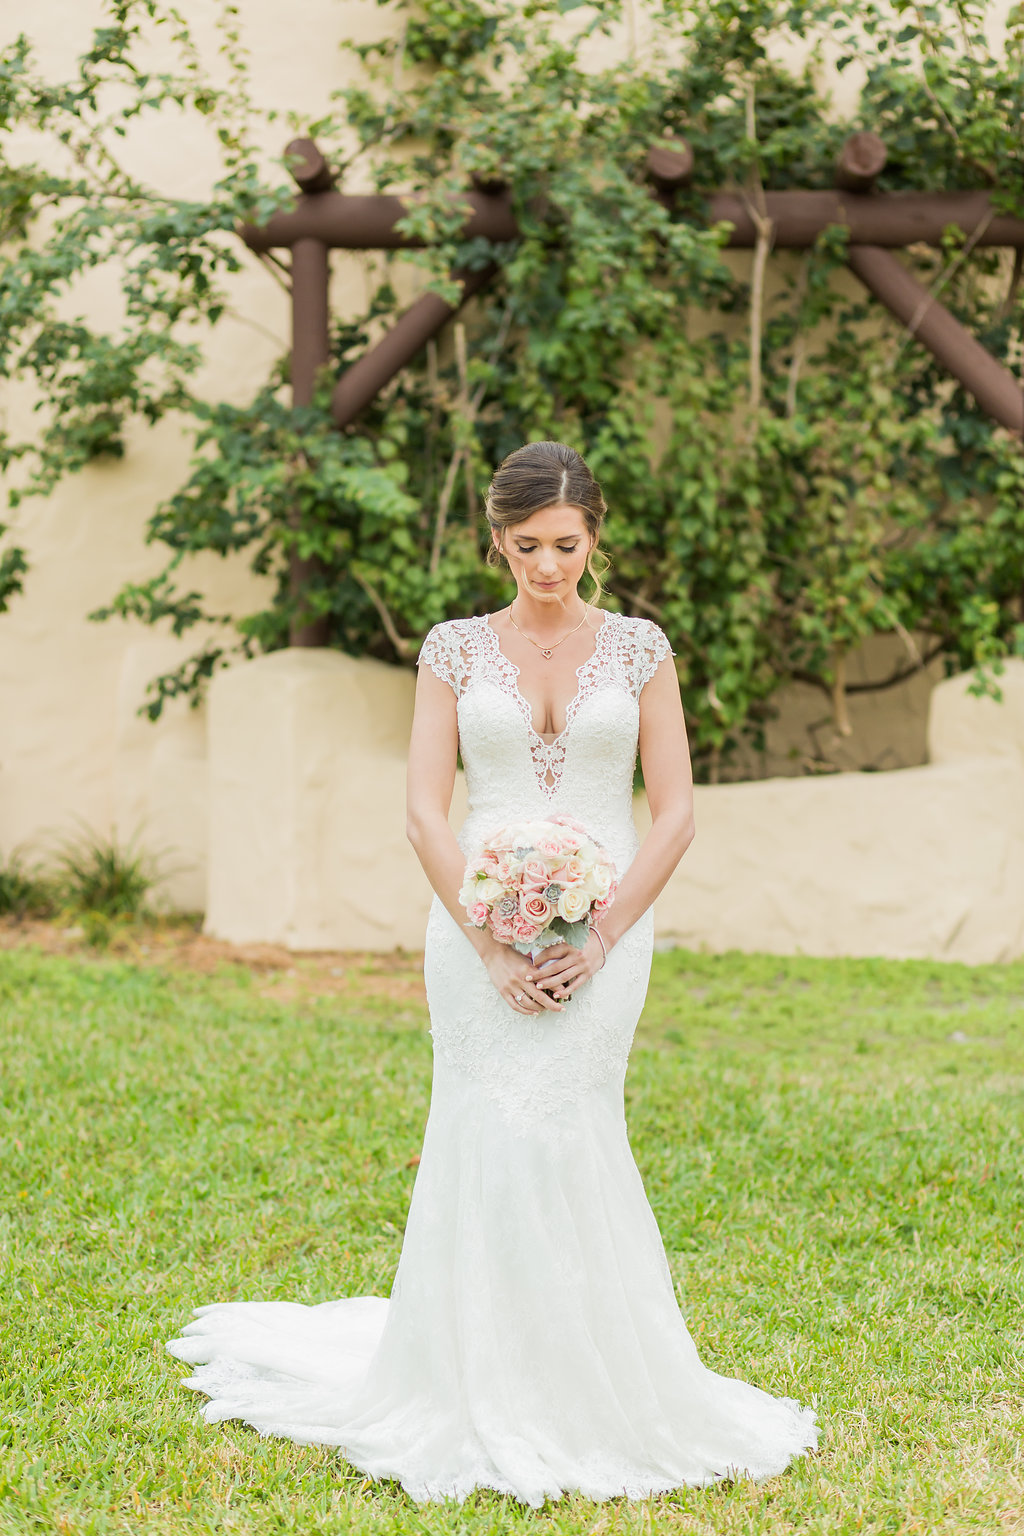 The bride's wedding dress is lace, open back, with beaded spine, lace detailing, lace cap sleeves and a low cut front. She carries a simple rose cluster bouquet with dusty miller